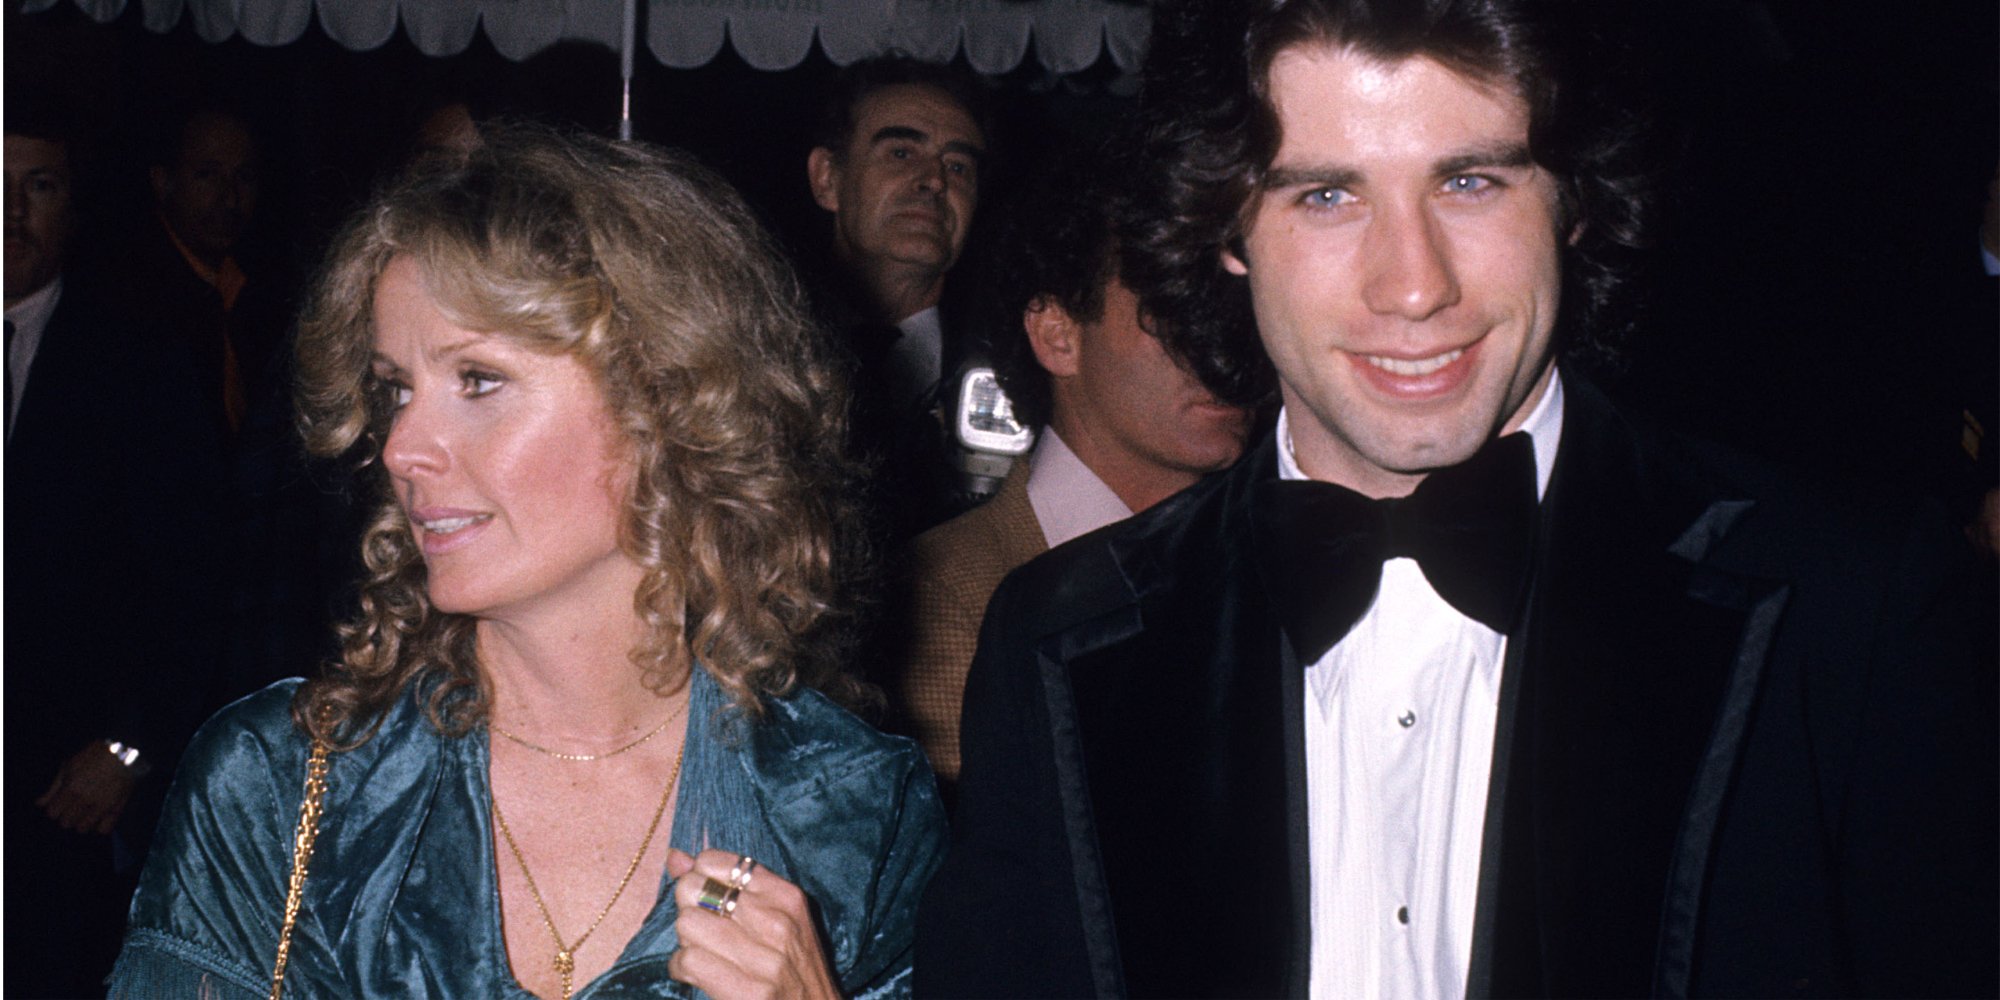 Diana Hyland and John Travolta pose together at a Hollywood event in 1976.